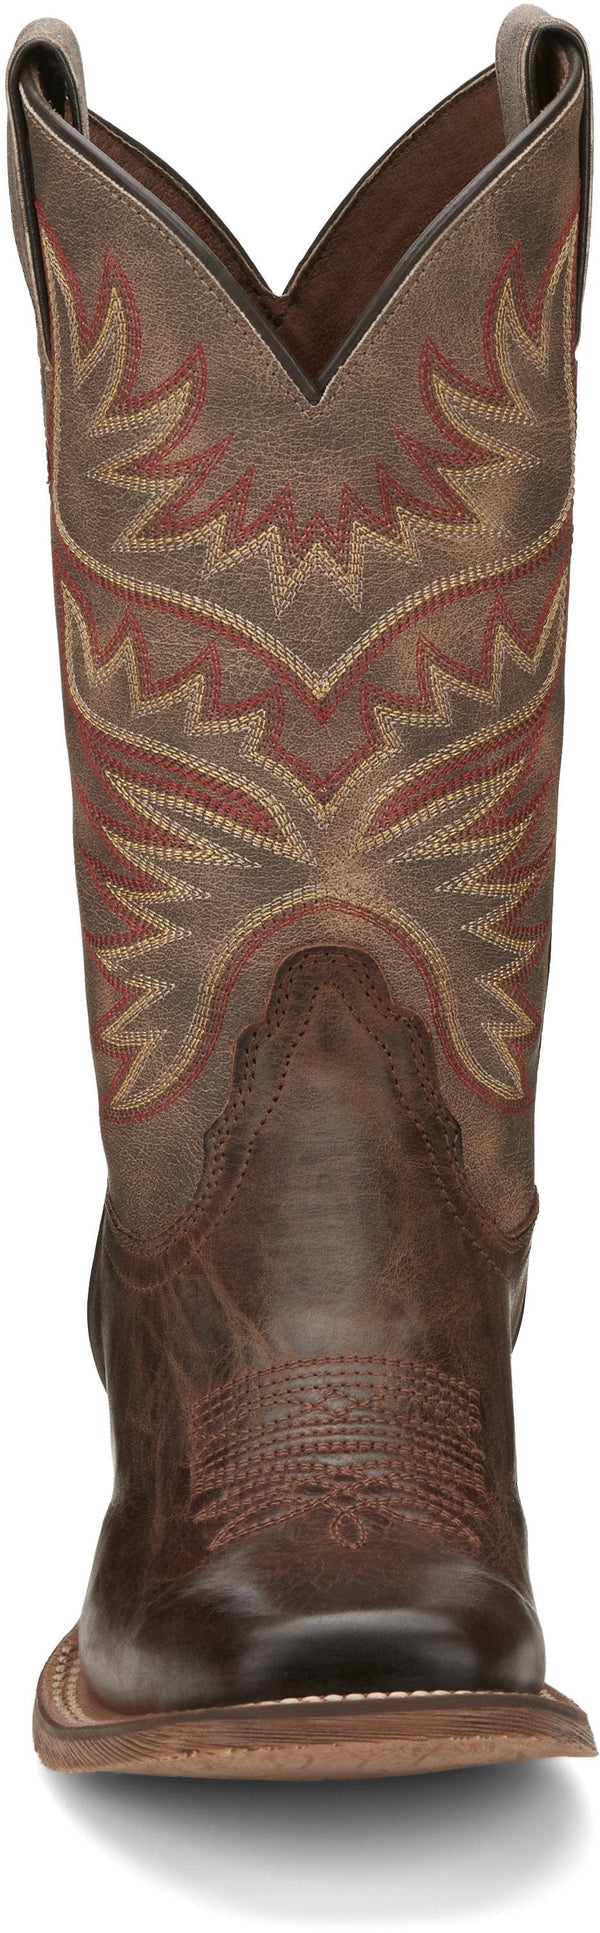 front view of tall women's dark brown square toe western boot with orange and tan embroidery.